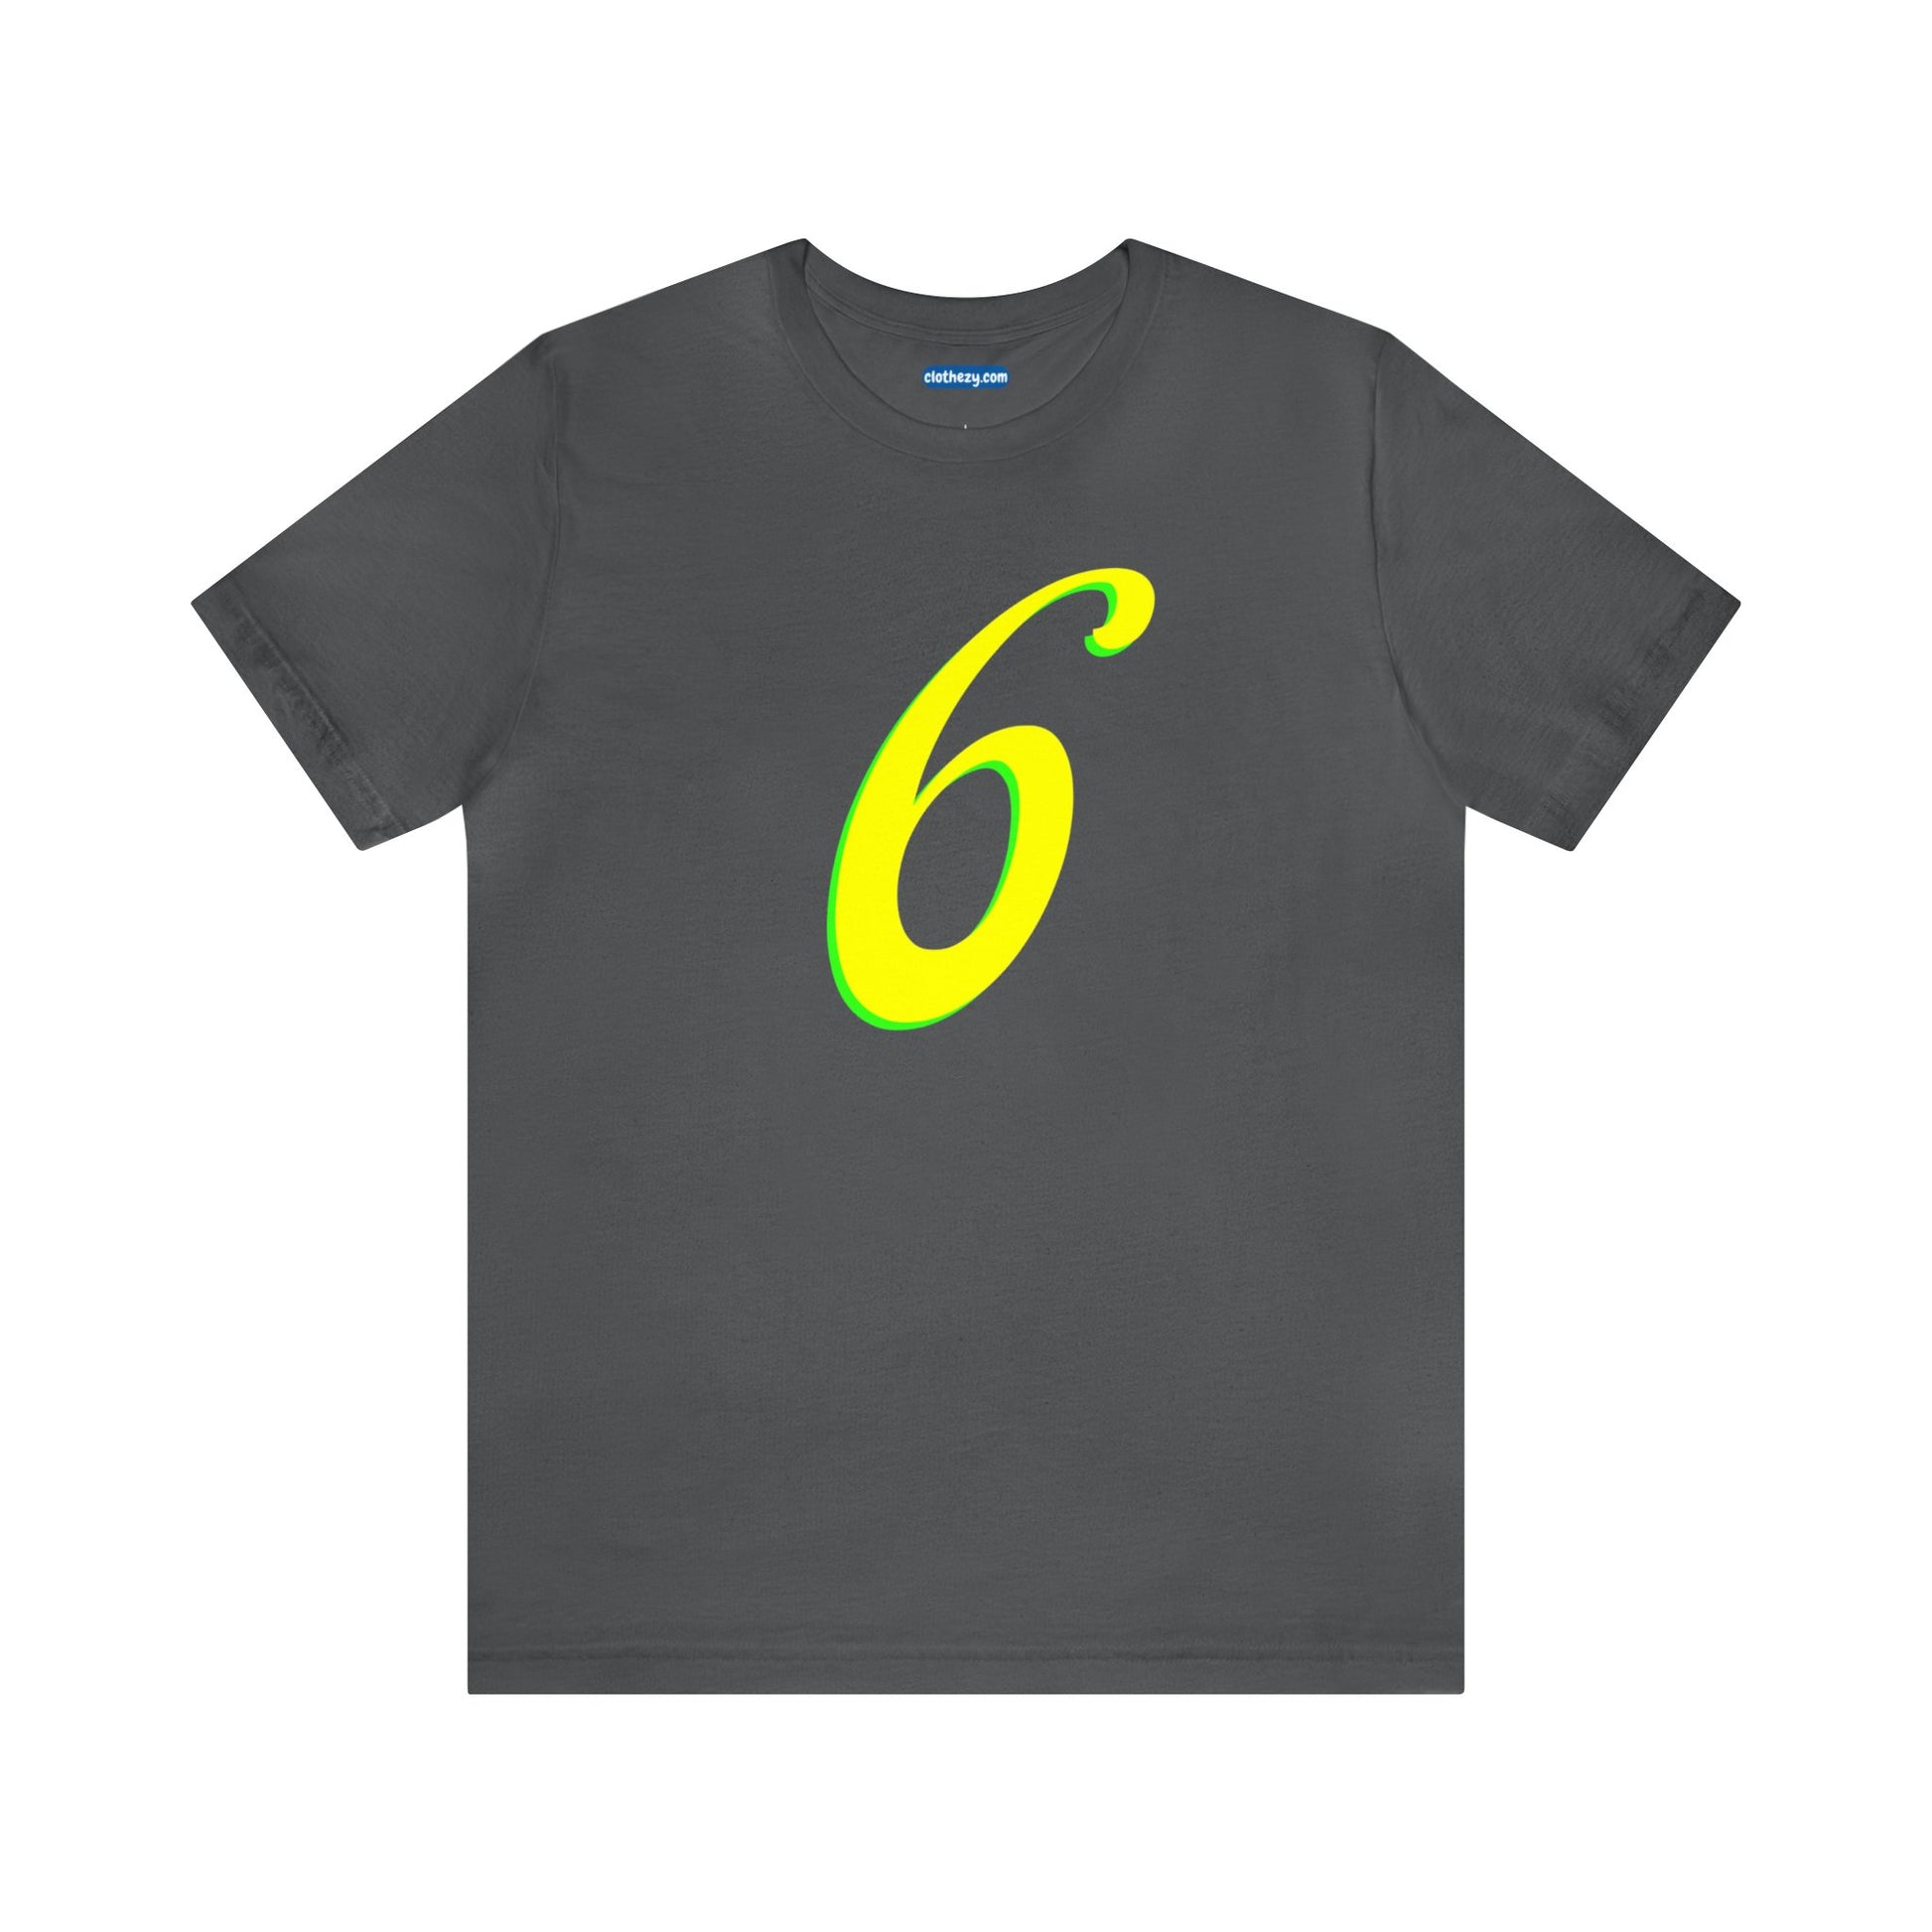 Number 6 Design - Soft Cotton Tee for birthdays and celebrations, Gift for friends and family, Multiple Options by clothezy.com in Black Size Small - Buy Now